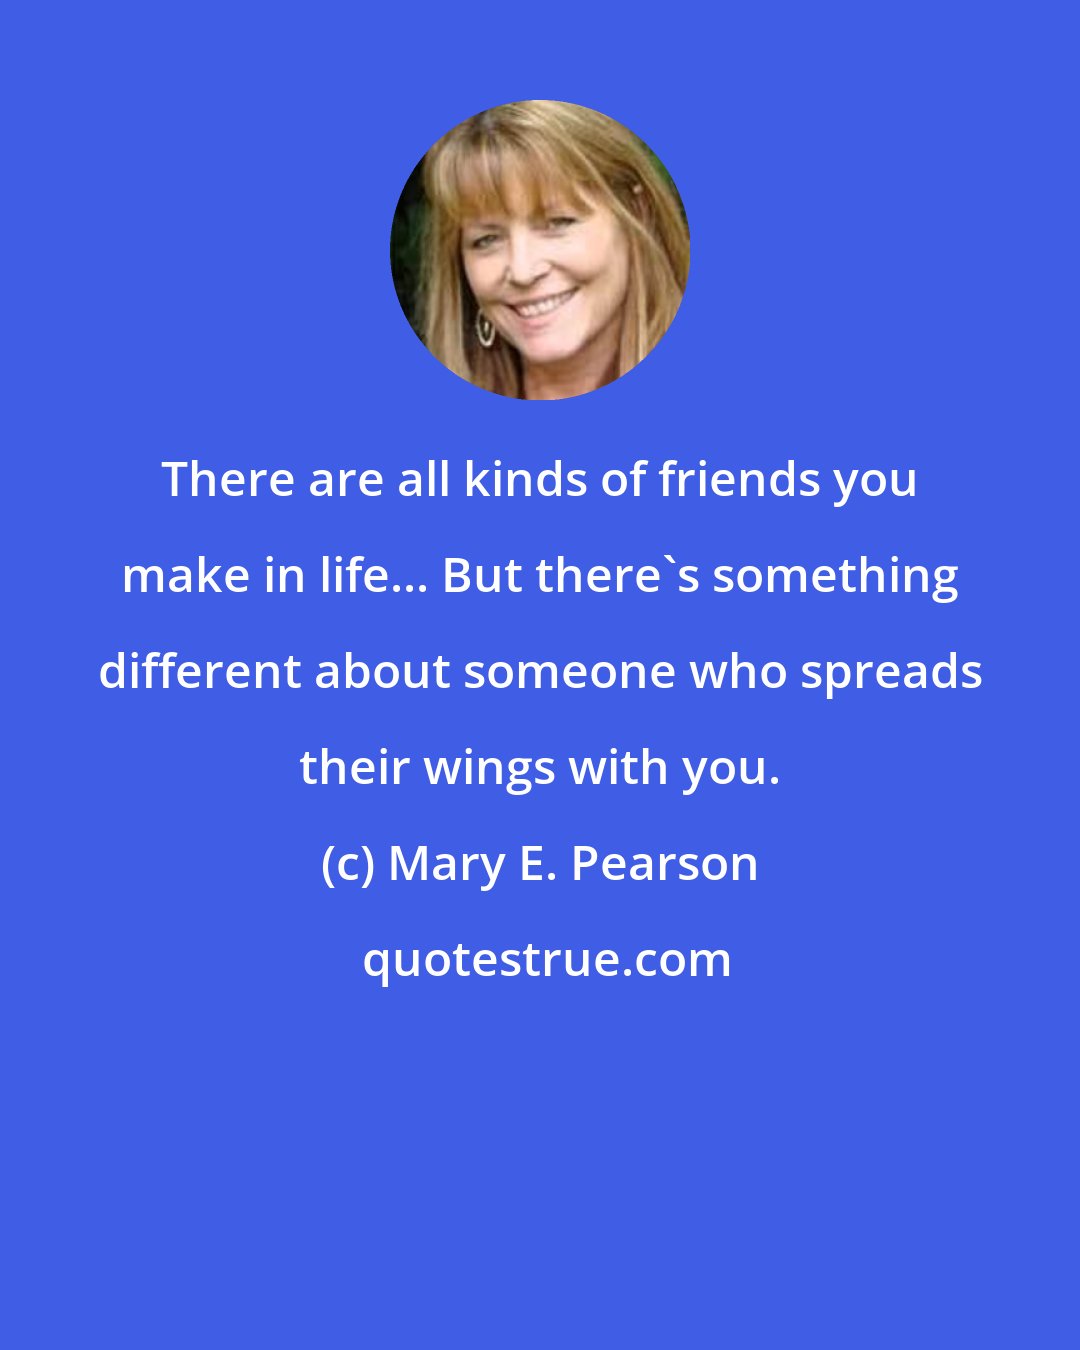 Mary E. Pearson: There are all kinds of friends you make in life... But there's something different about someone who spreads their wings with you.